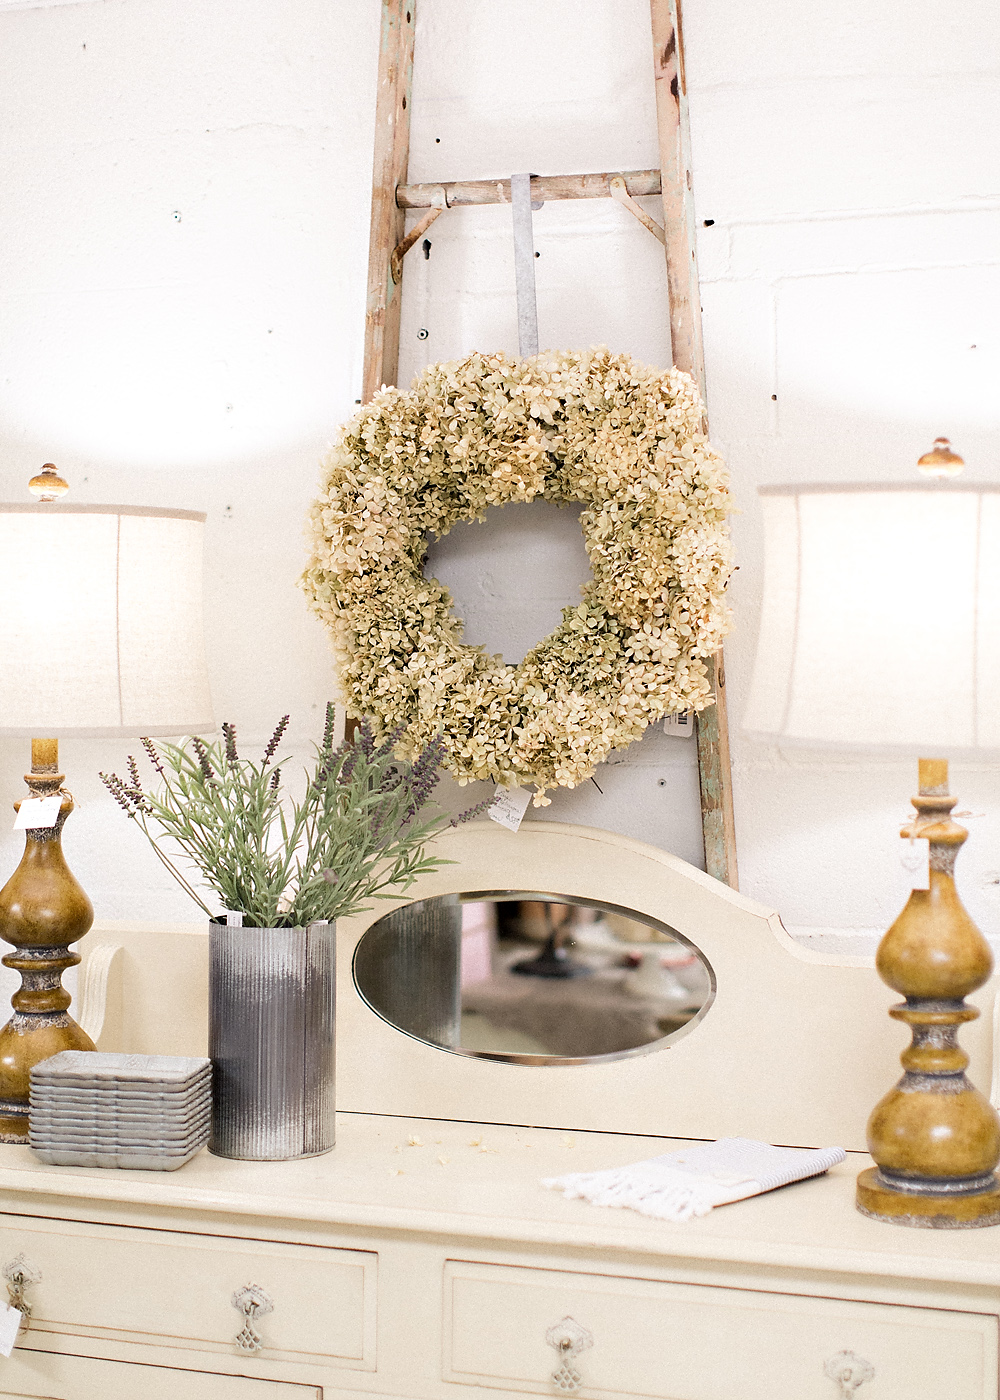 kel and mel, the marriage shop, linen and rust, arrington tennessee home decor